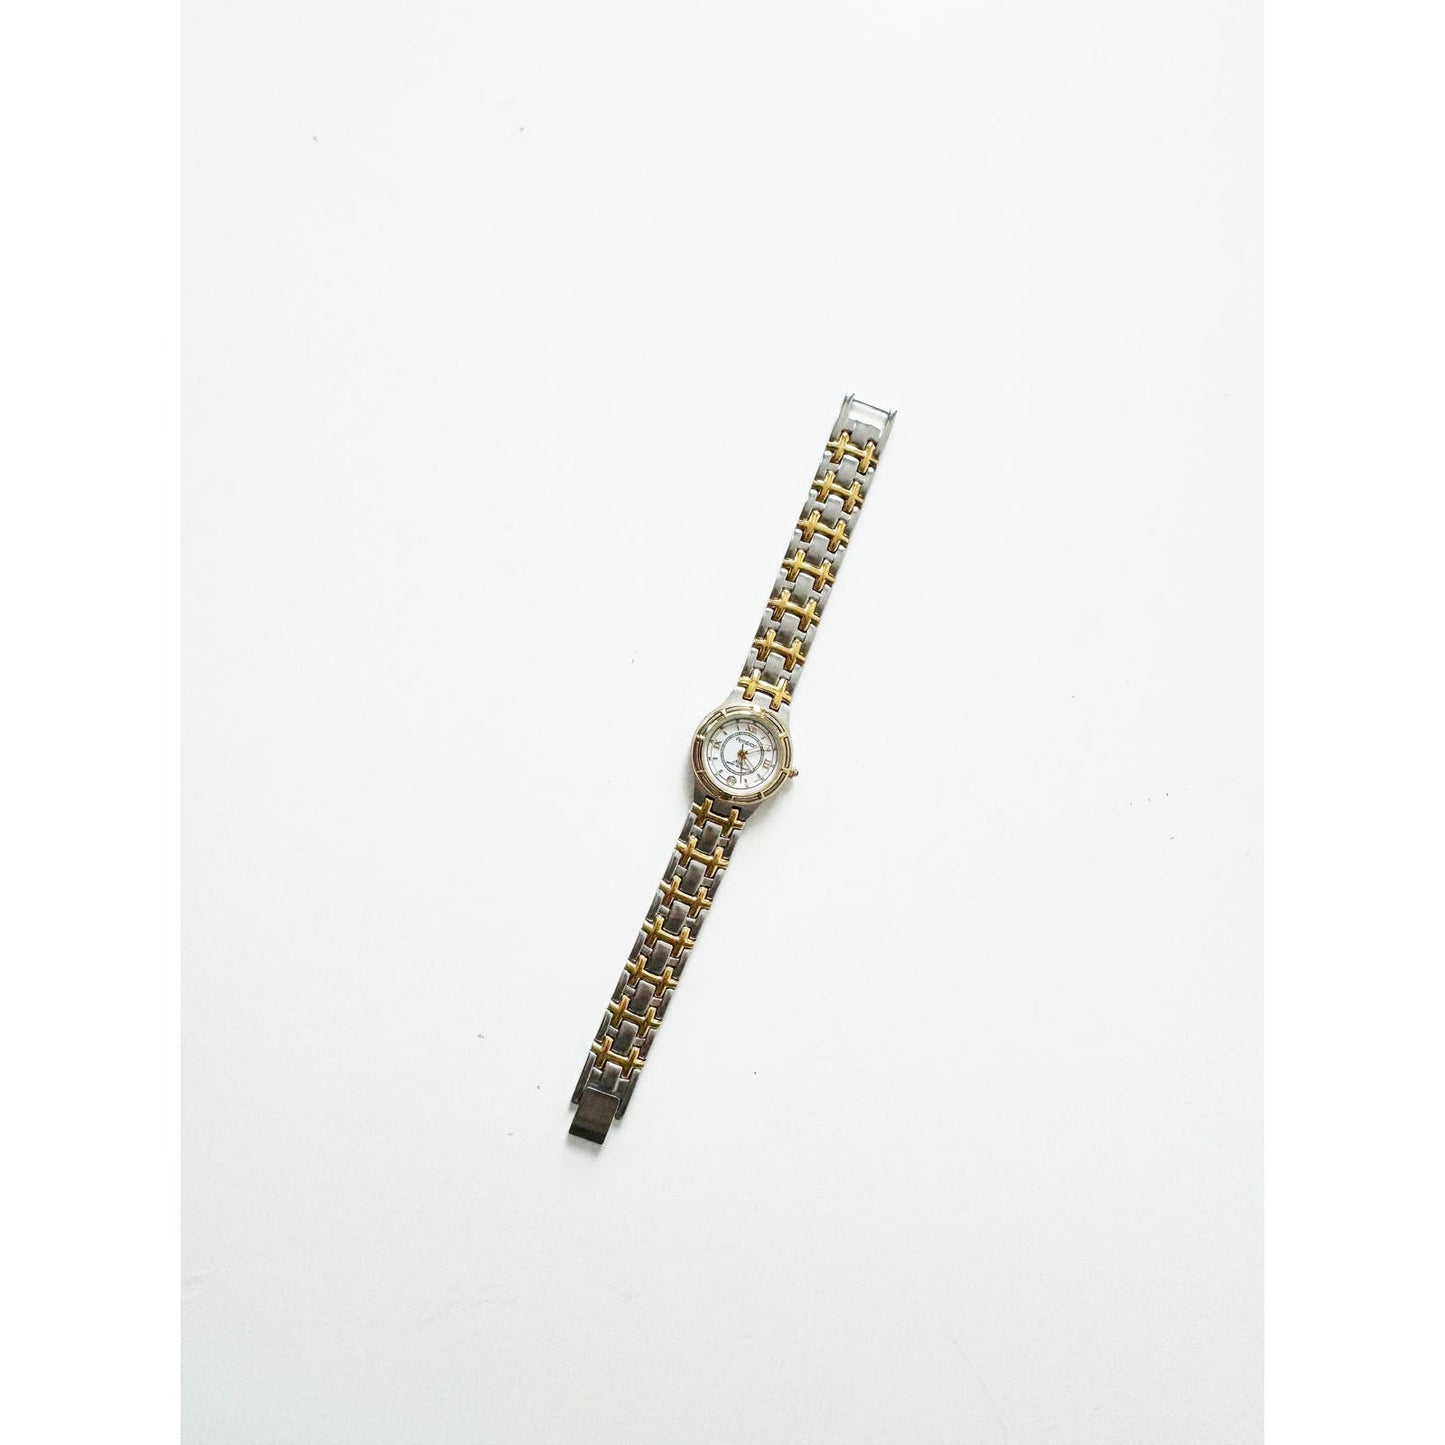 Vintage Two Tone Watch Cuff with Circular Face